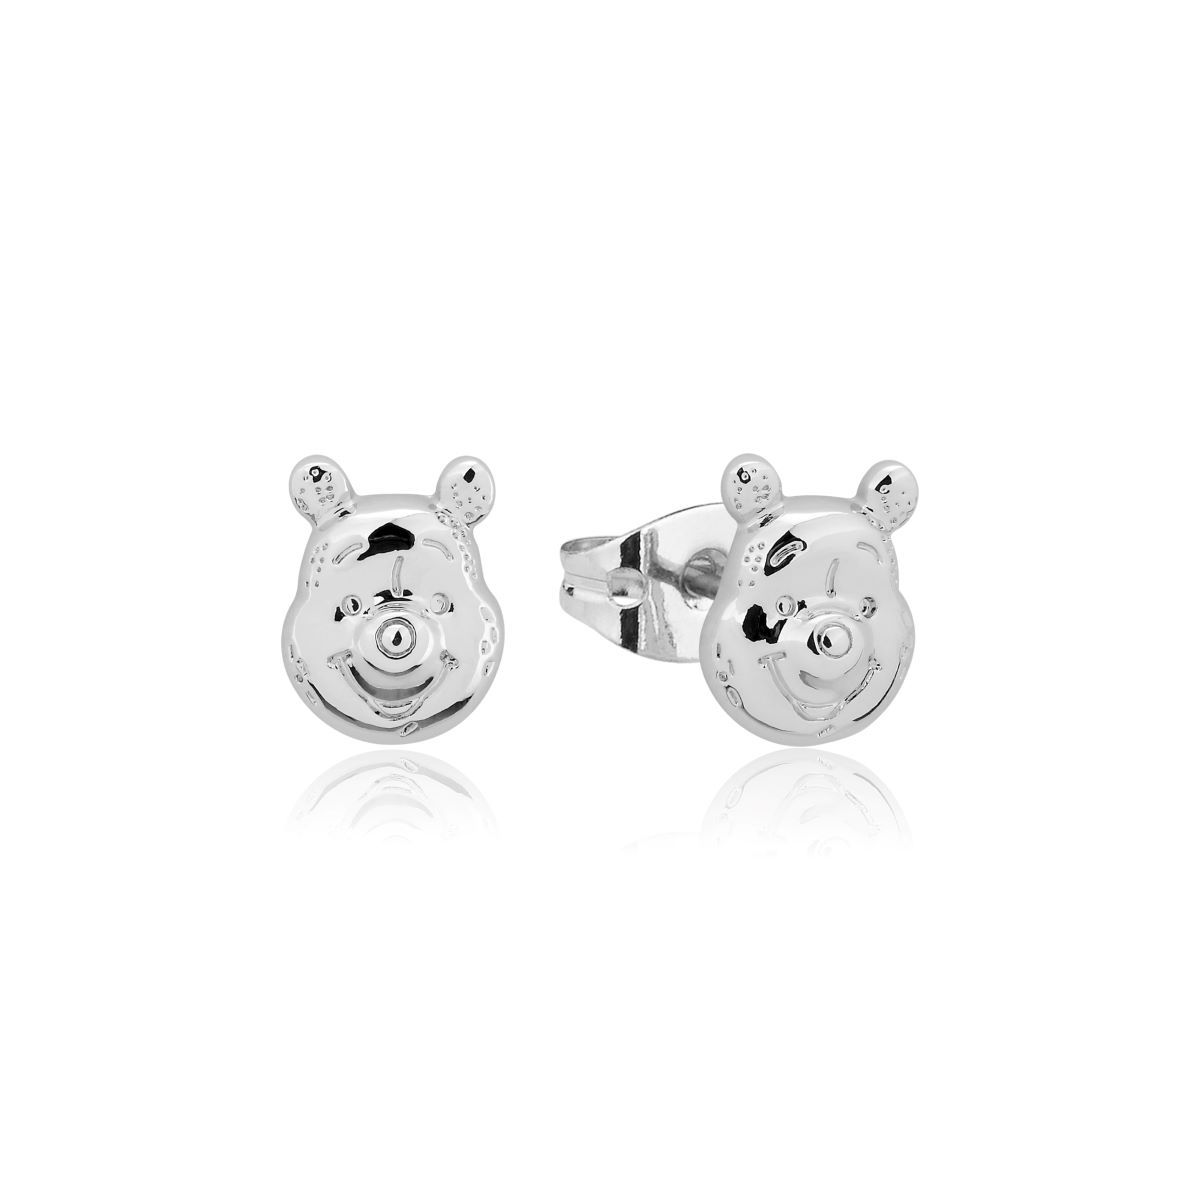 COUTURE KINGDOM - Disney Winnie The Pooh Stud Earrings Necklace Couture Kingdom 